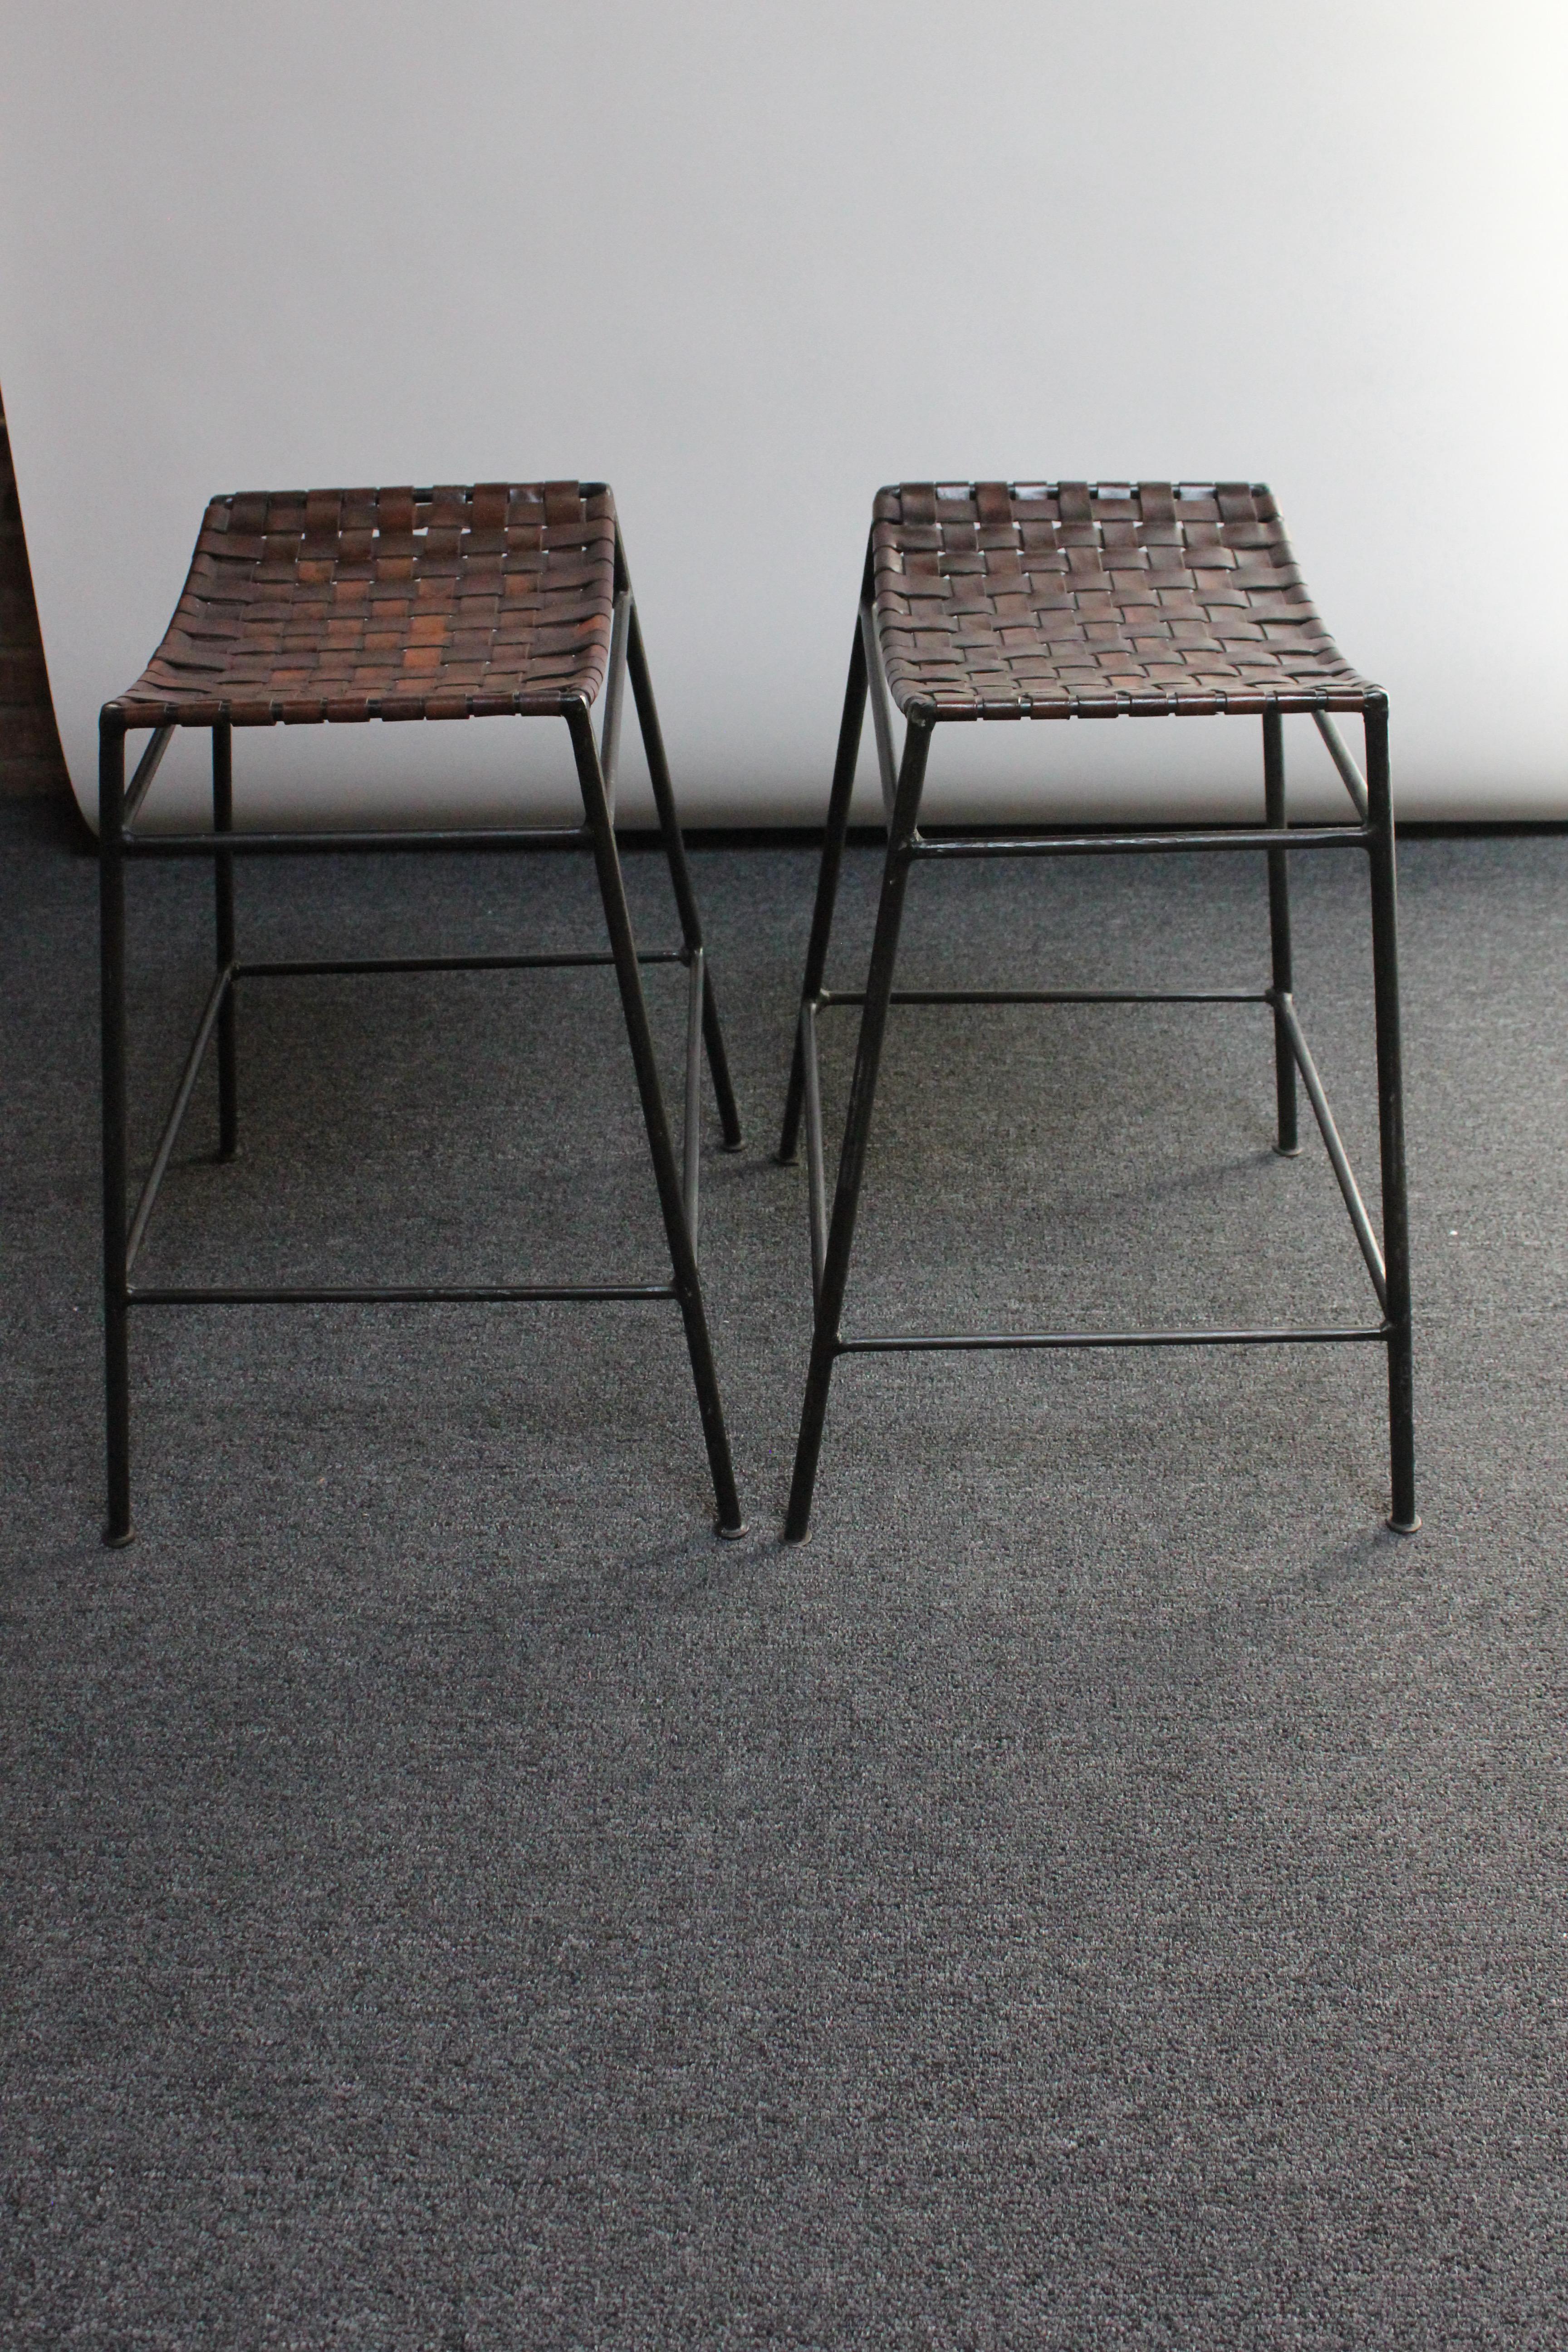 Woven Pair of Counter Stools in Leather and Iron After Lila Swift and Donald Monell